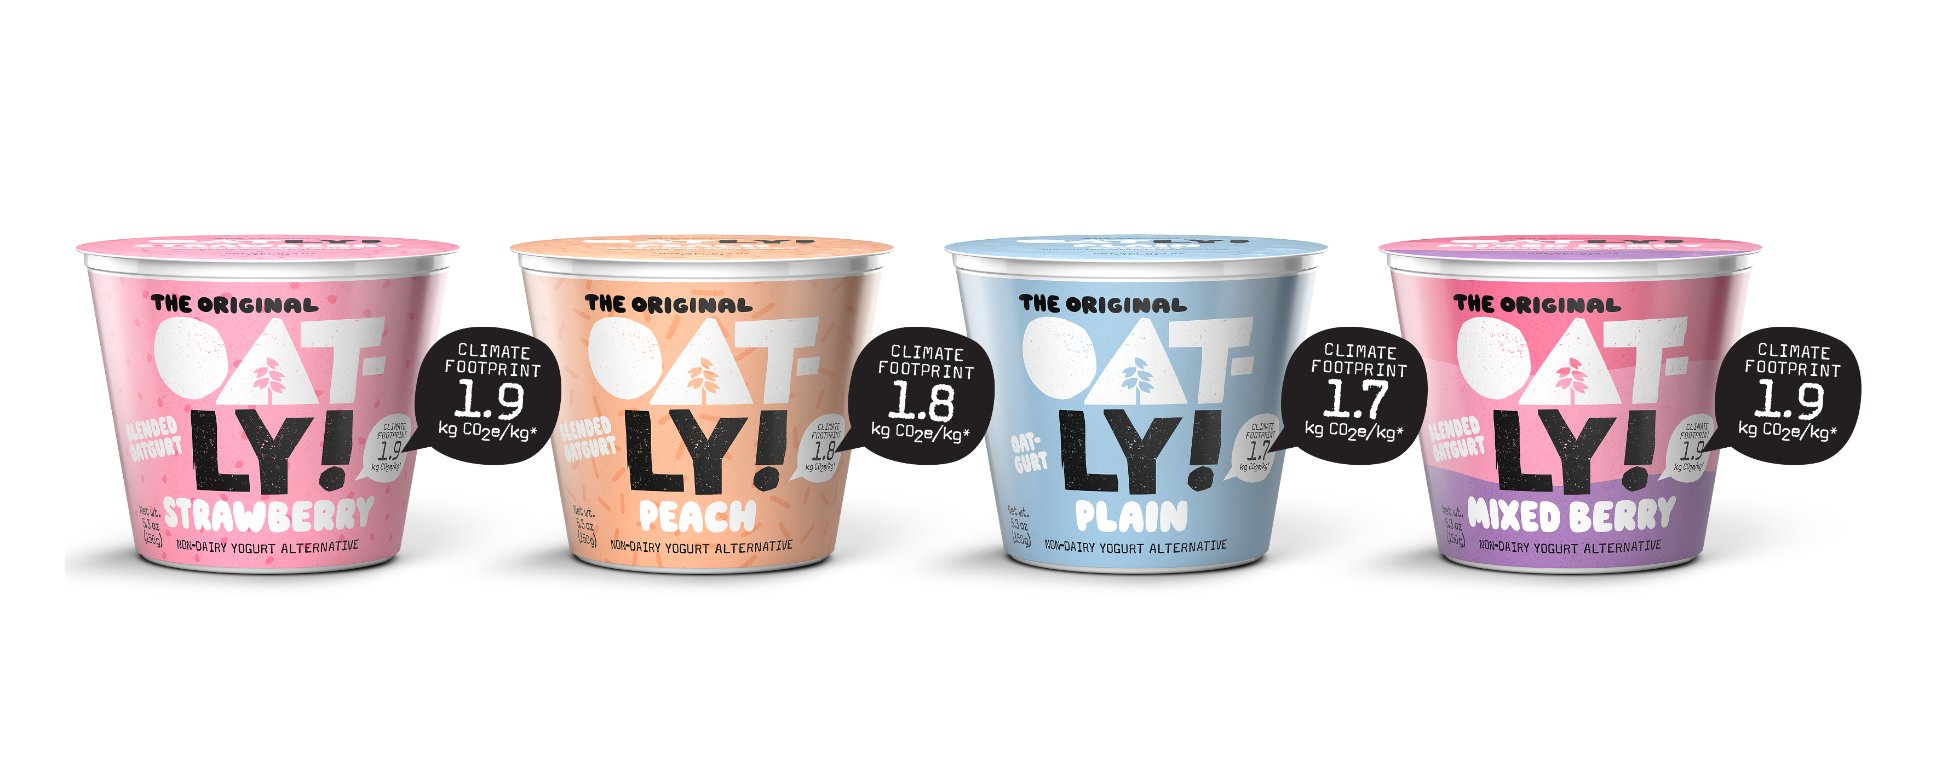 Oatly To Introduce Carbon Footprint Labeling In North America